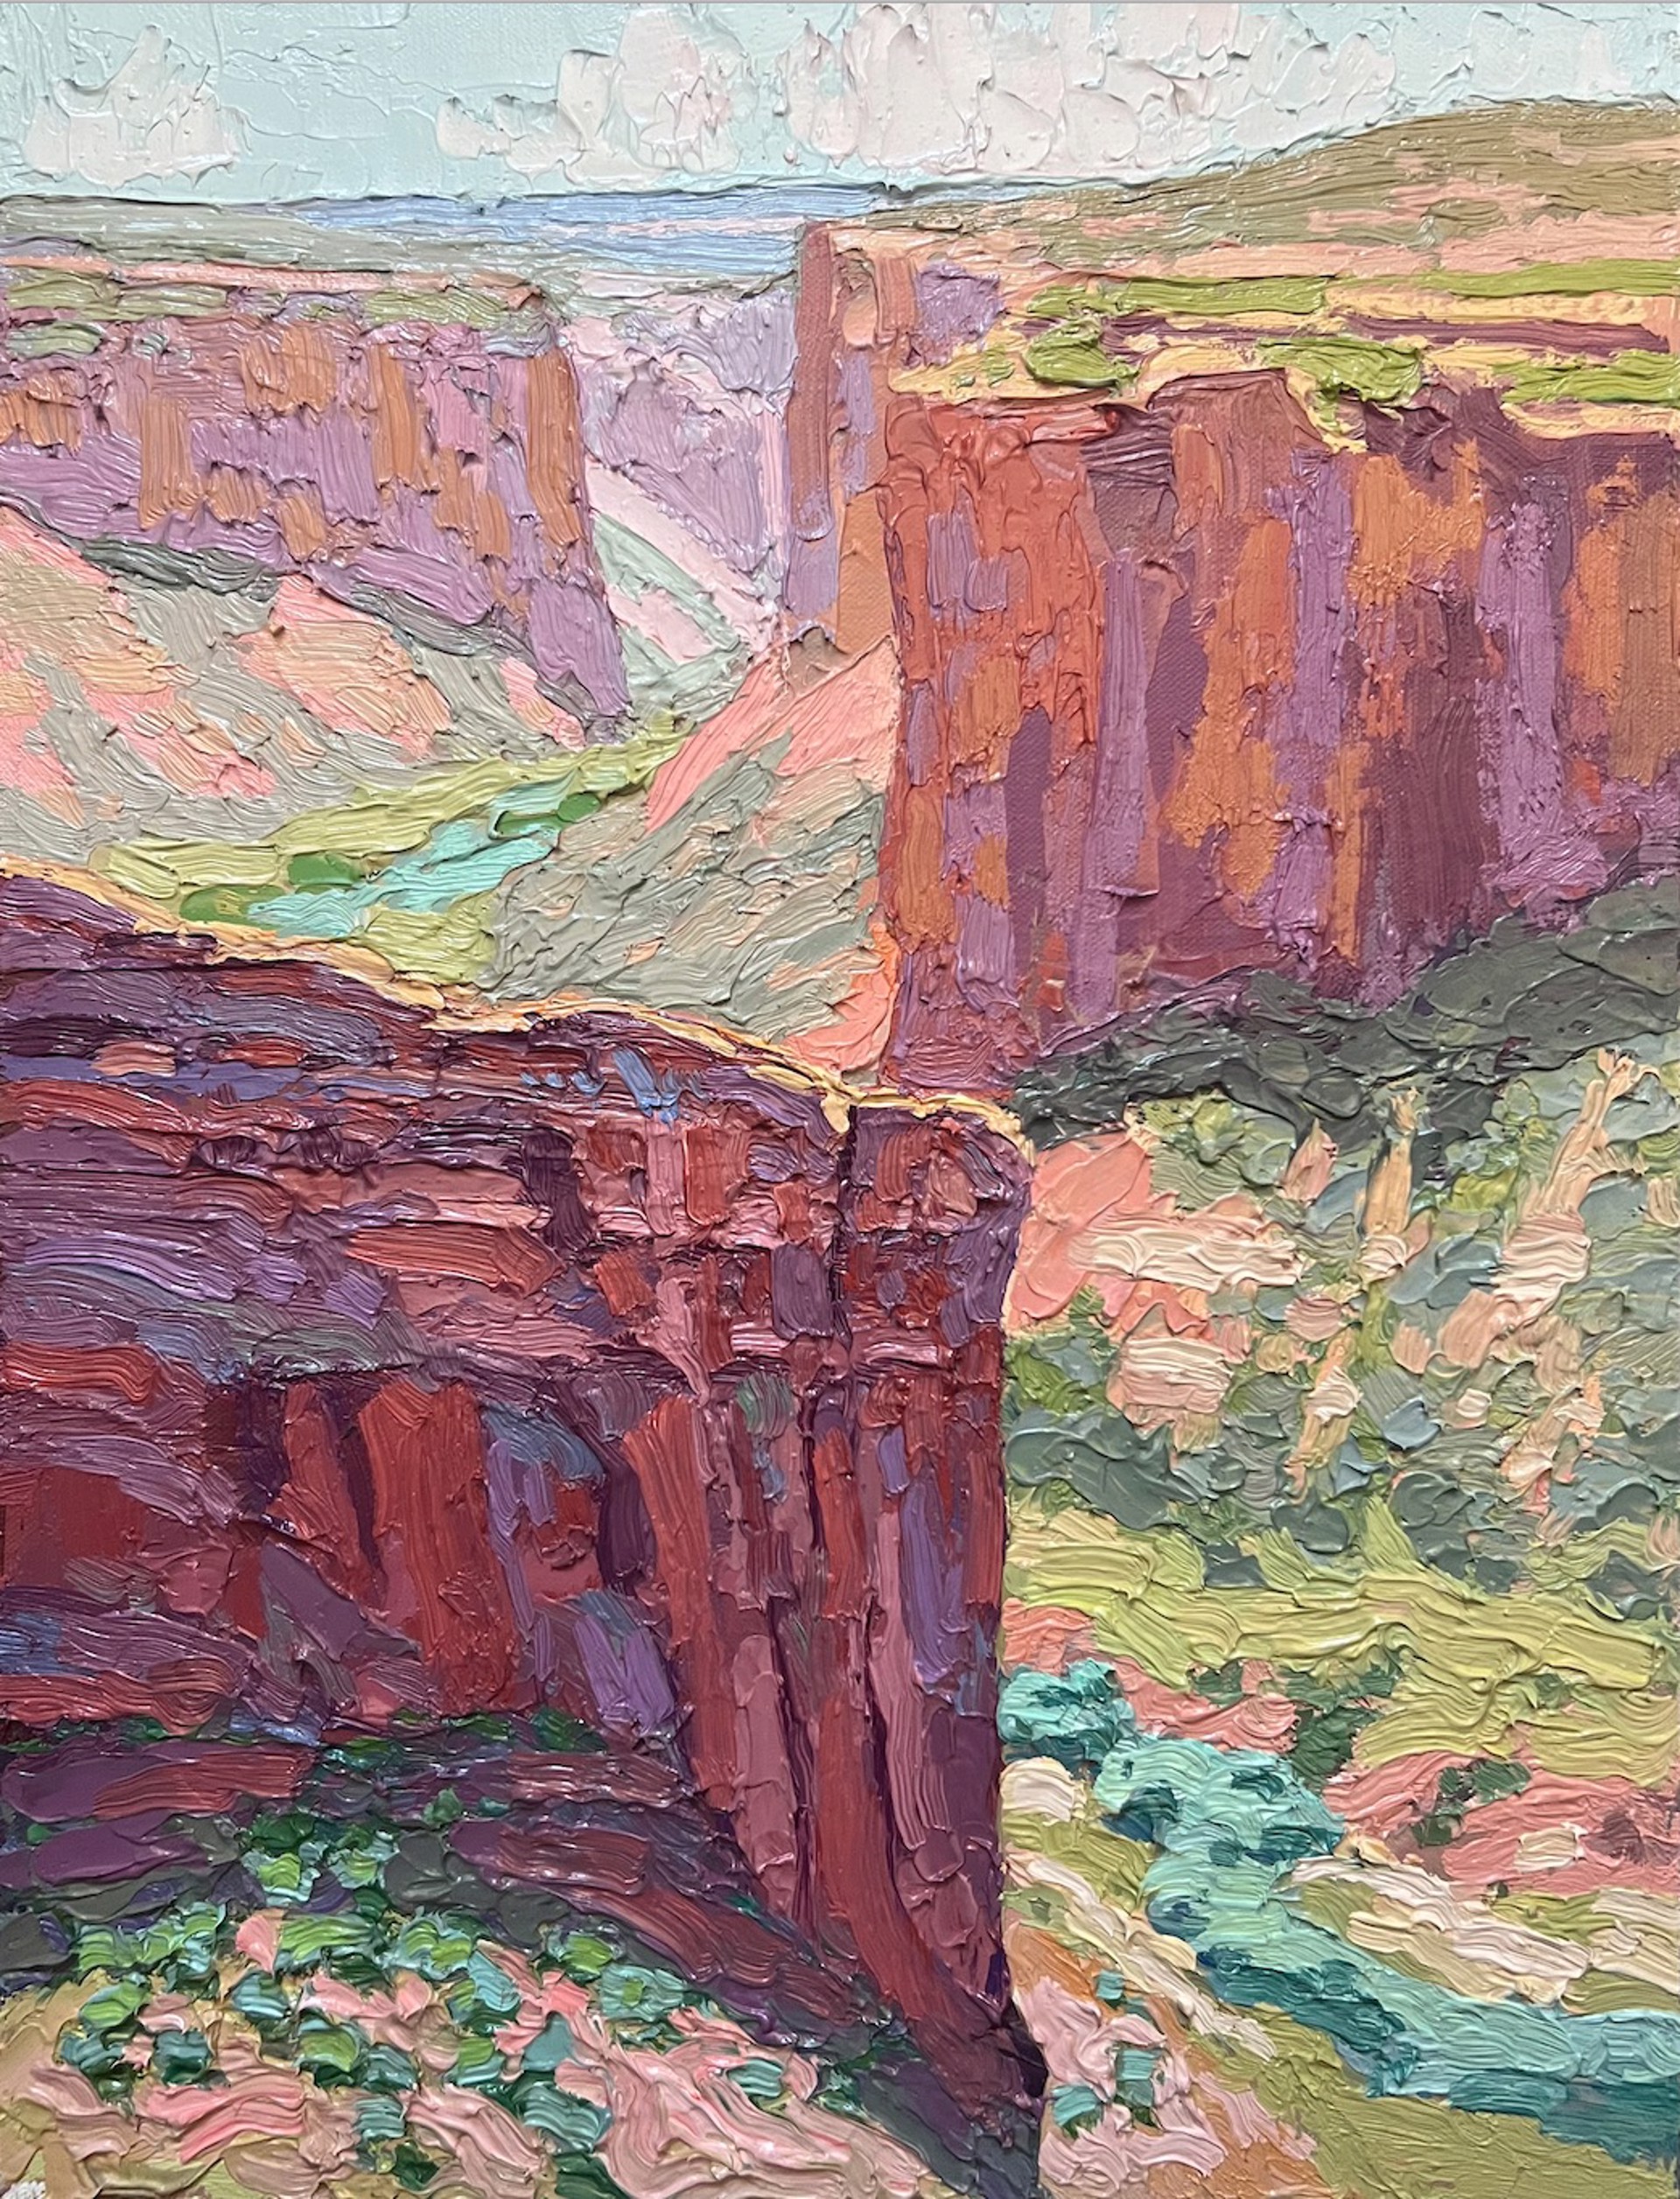 Colorful Valley, Canyon de Chelly by Billyo O'Donnell